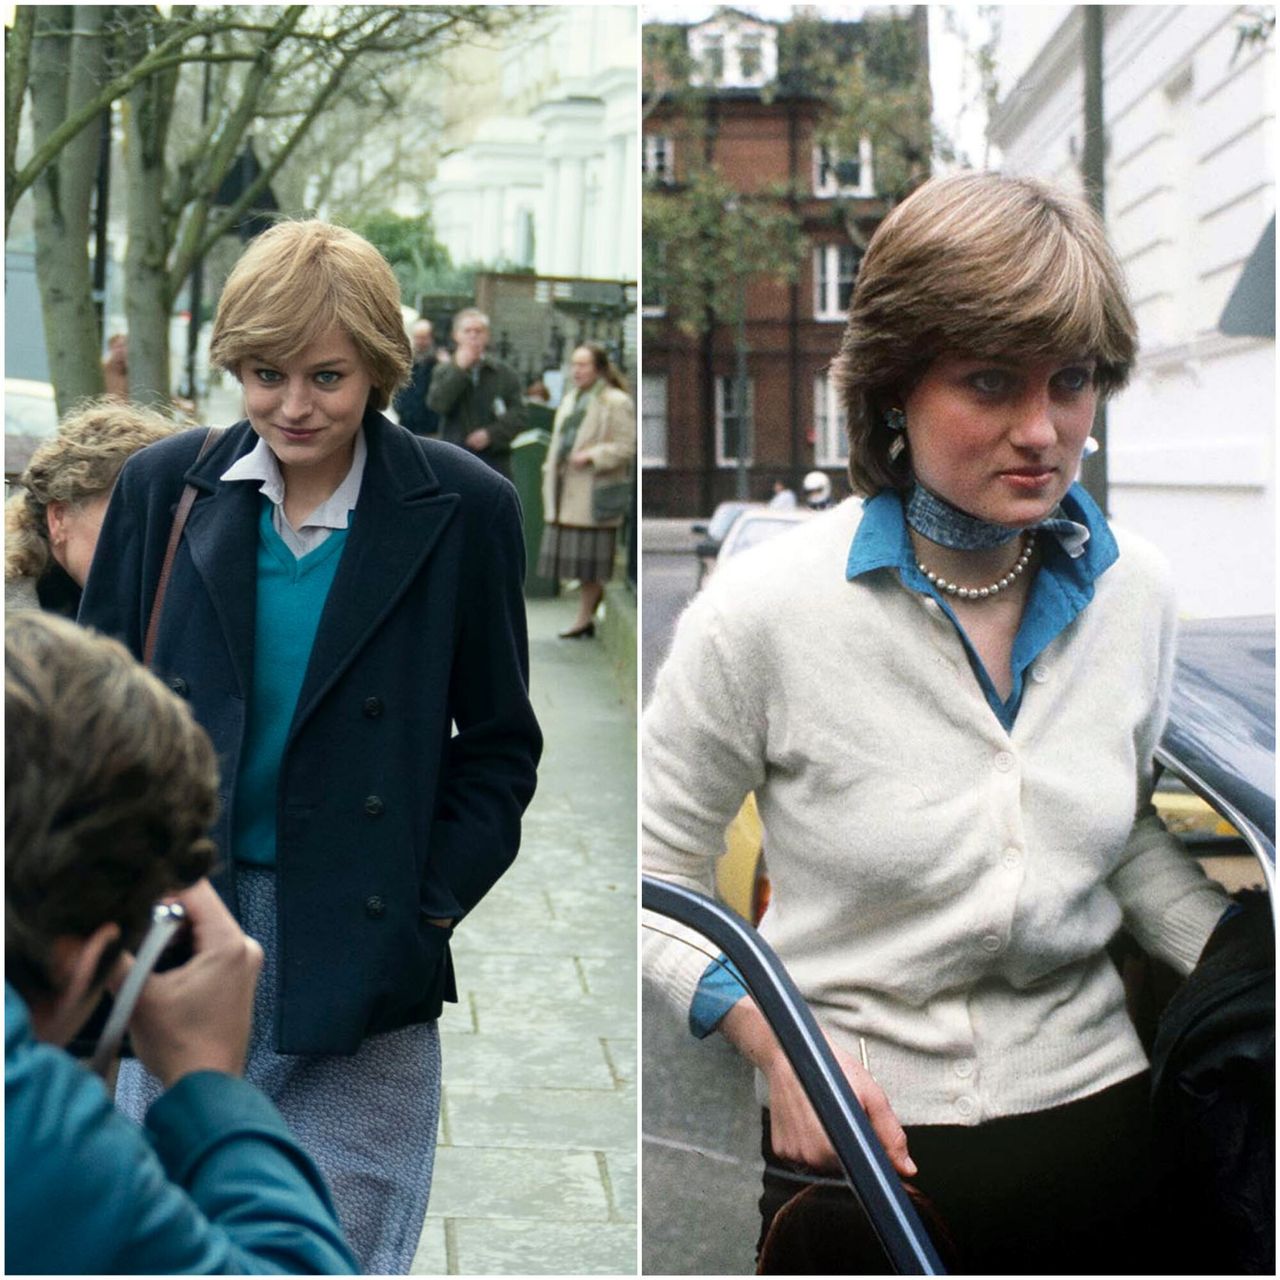 Princess Diana and, on the right, Princess Diana in The Crown, played by Emma Corrin